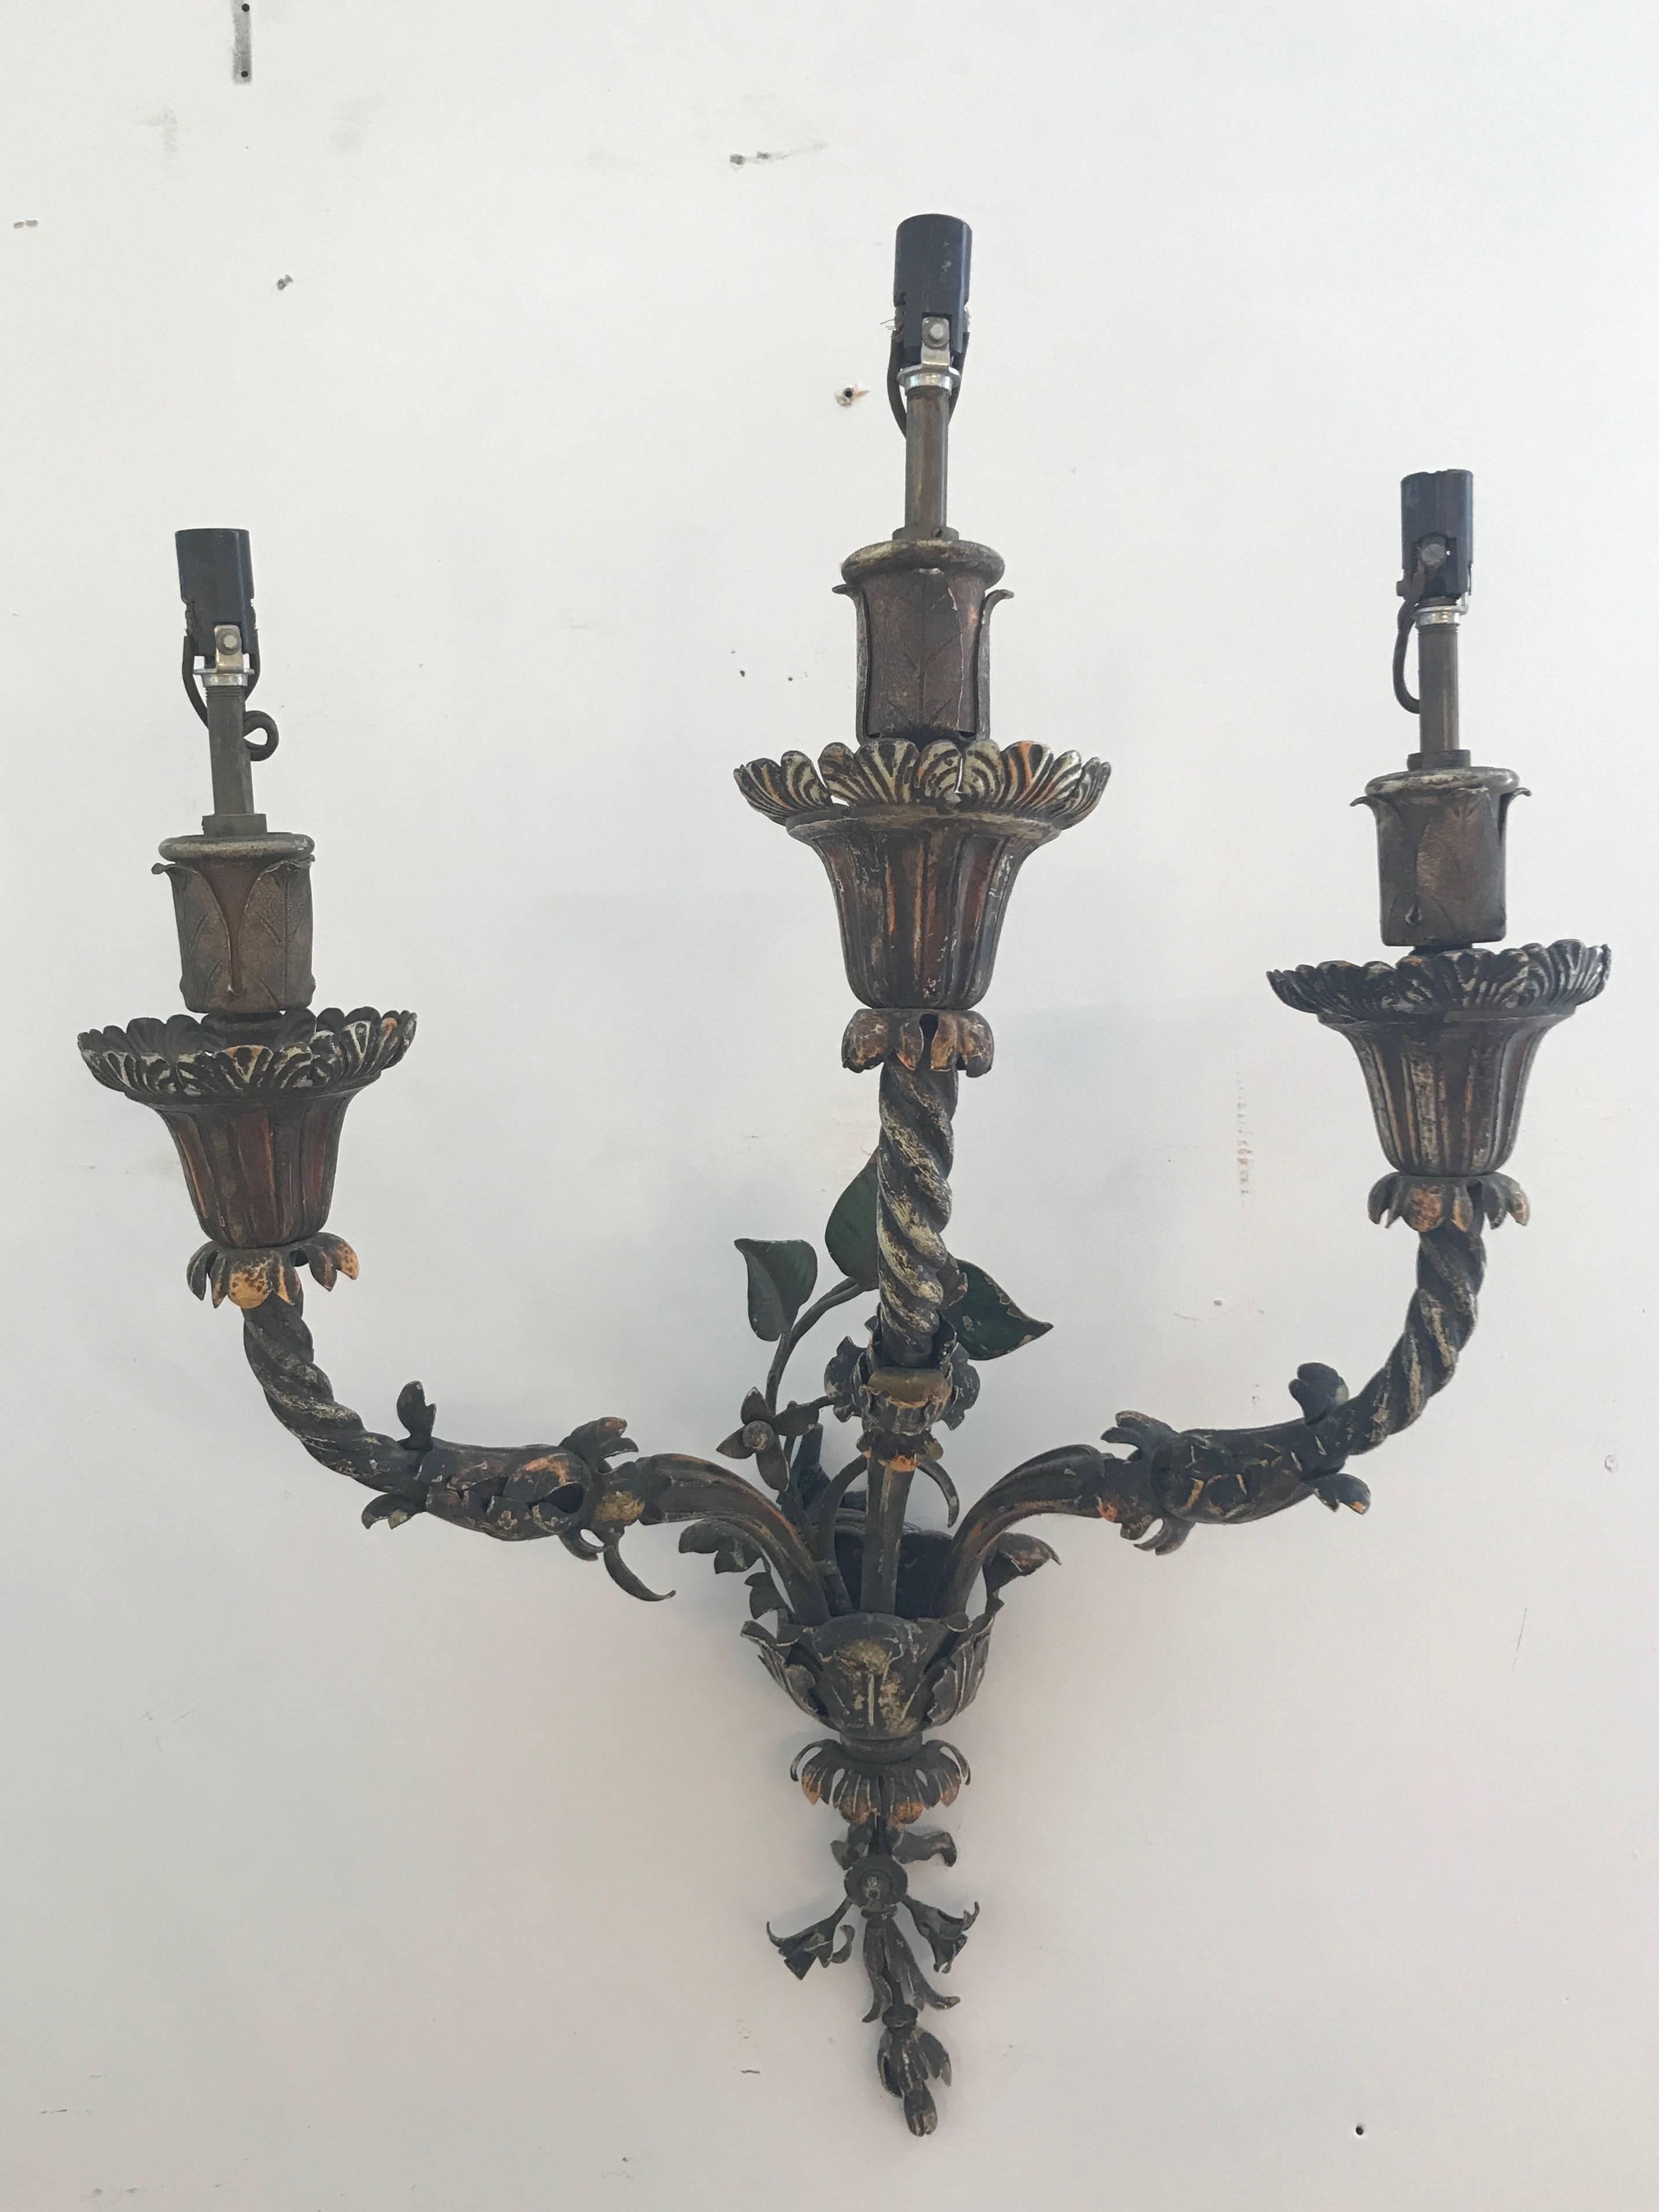 Pair of Early 20th Century painted iron sconces. With worn paint and foliate details.